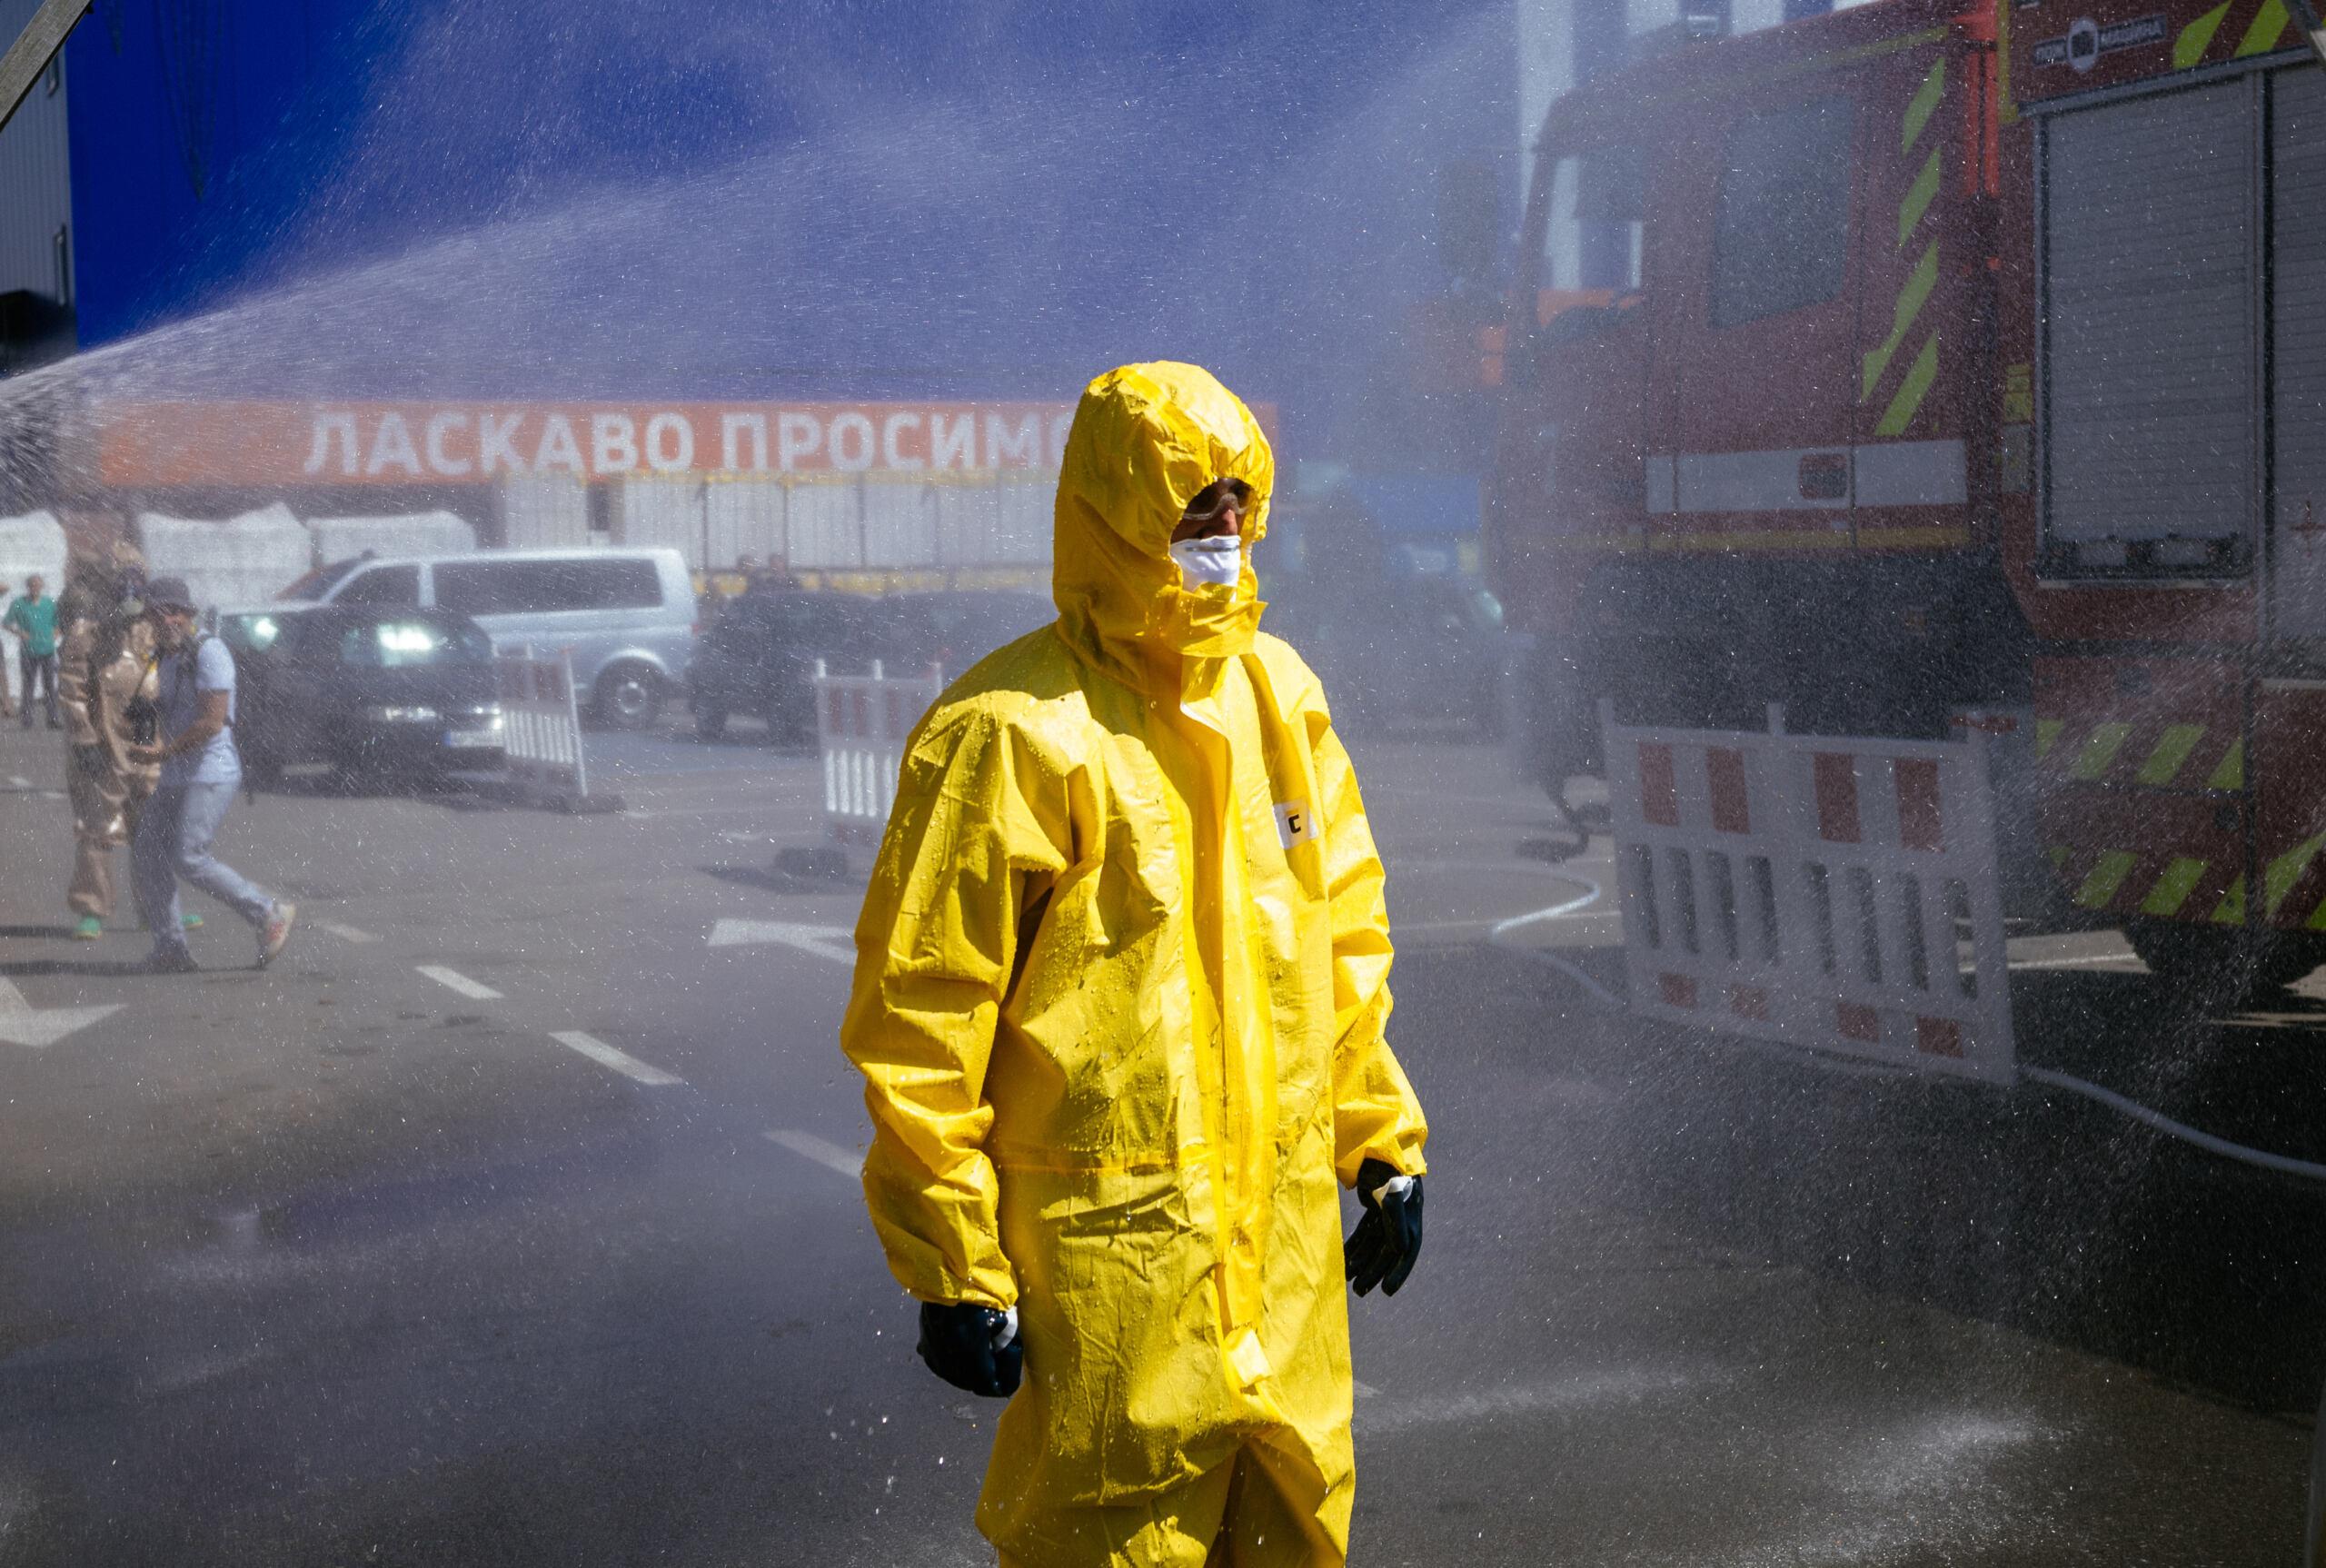 A Ukrainian Emergency Ministry rescuer attends an exercise in the city of Zaporizhzhia on August 17, 2022, in case of a possible nuclear incident at the Zaporizhzhia nuclear power plant located near the city. - Ukraine remains deeply scarred by the 1986 Chernobyl nuclear catastrophe, when a Soviet-era reactor exploded and streamed radiation into the atmosphere in the country's north. The Zaporizhzhia nuclear power plant in southern Ukraine was occupied in the early days of the war and it has remained in Russian hands ever since. (Photo by Dimitar DILKOFF / AFP)